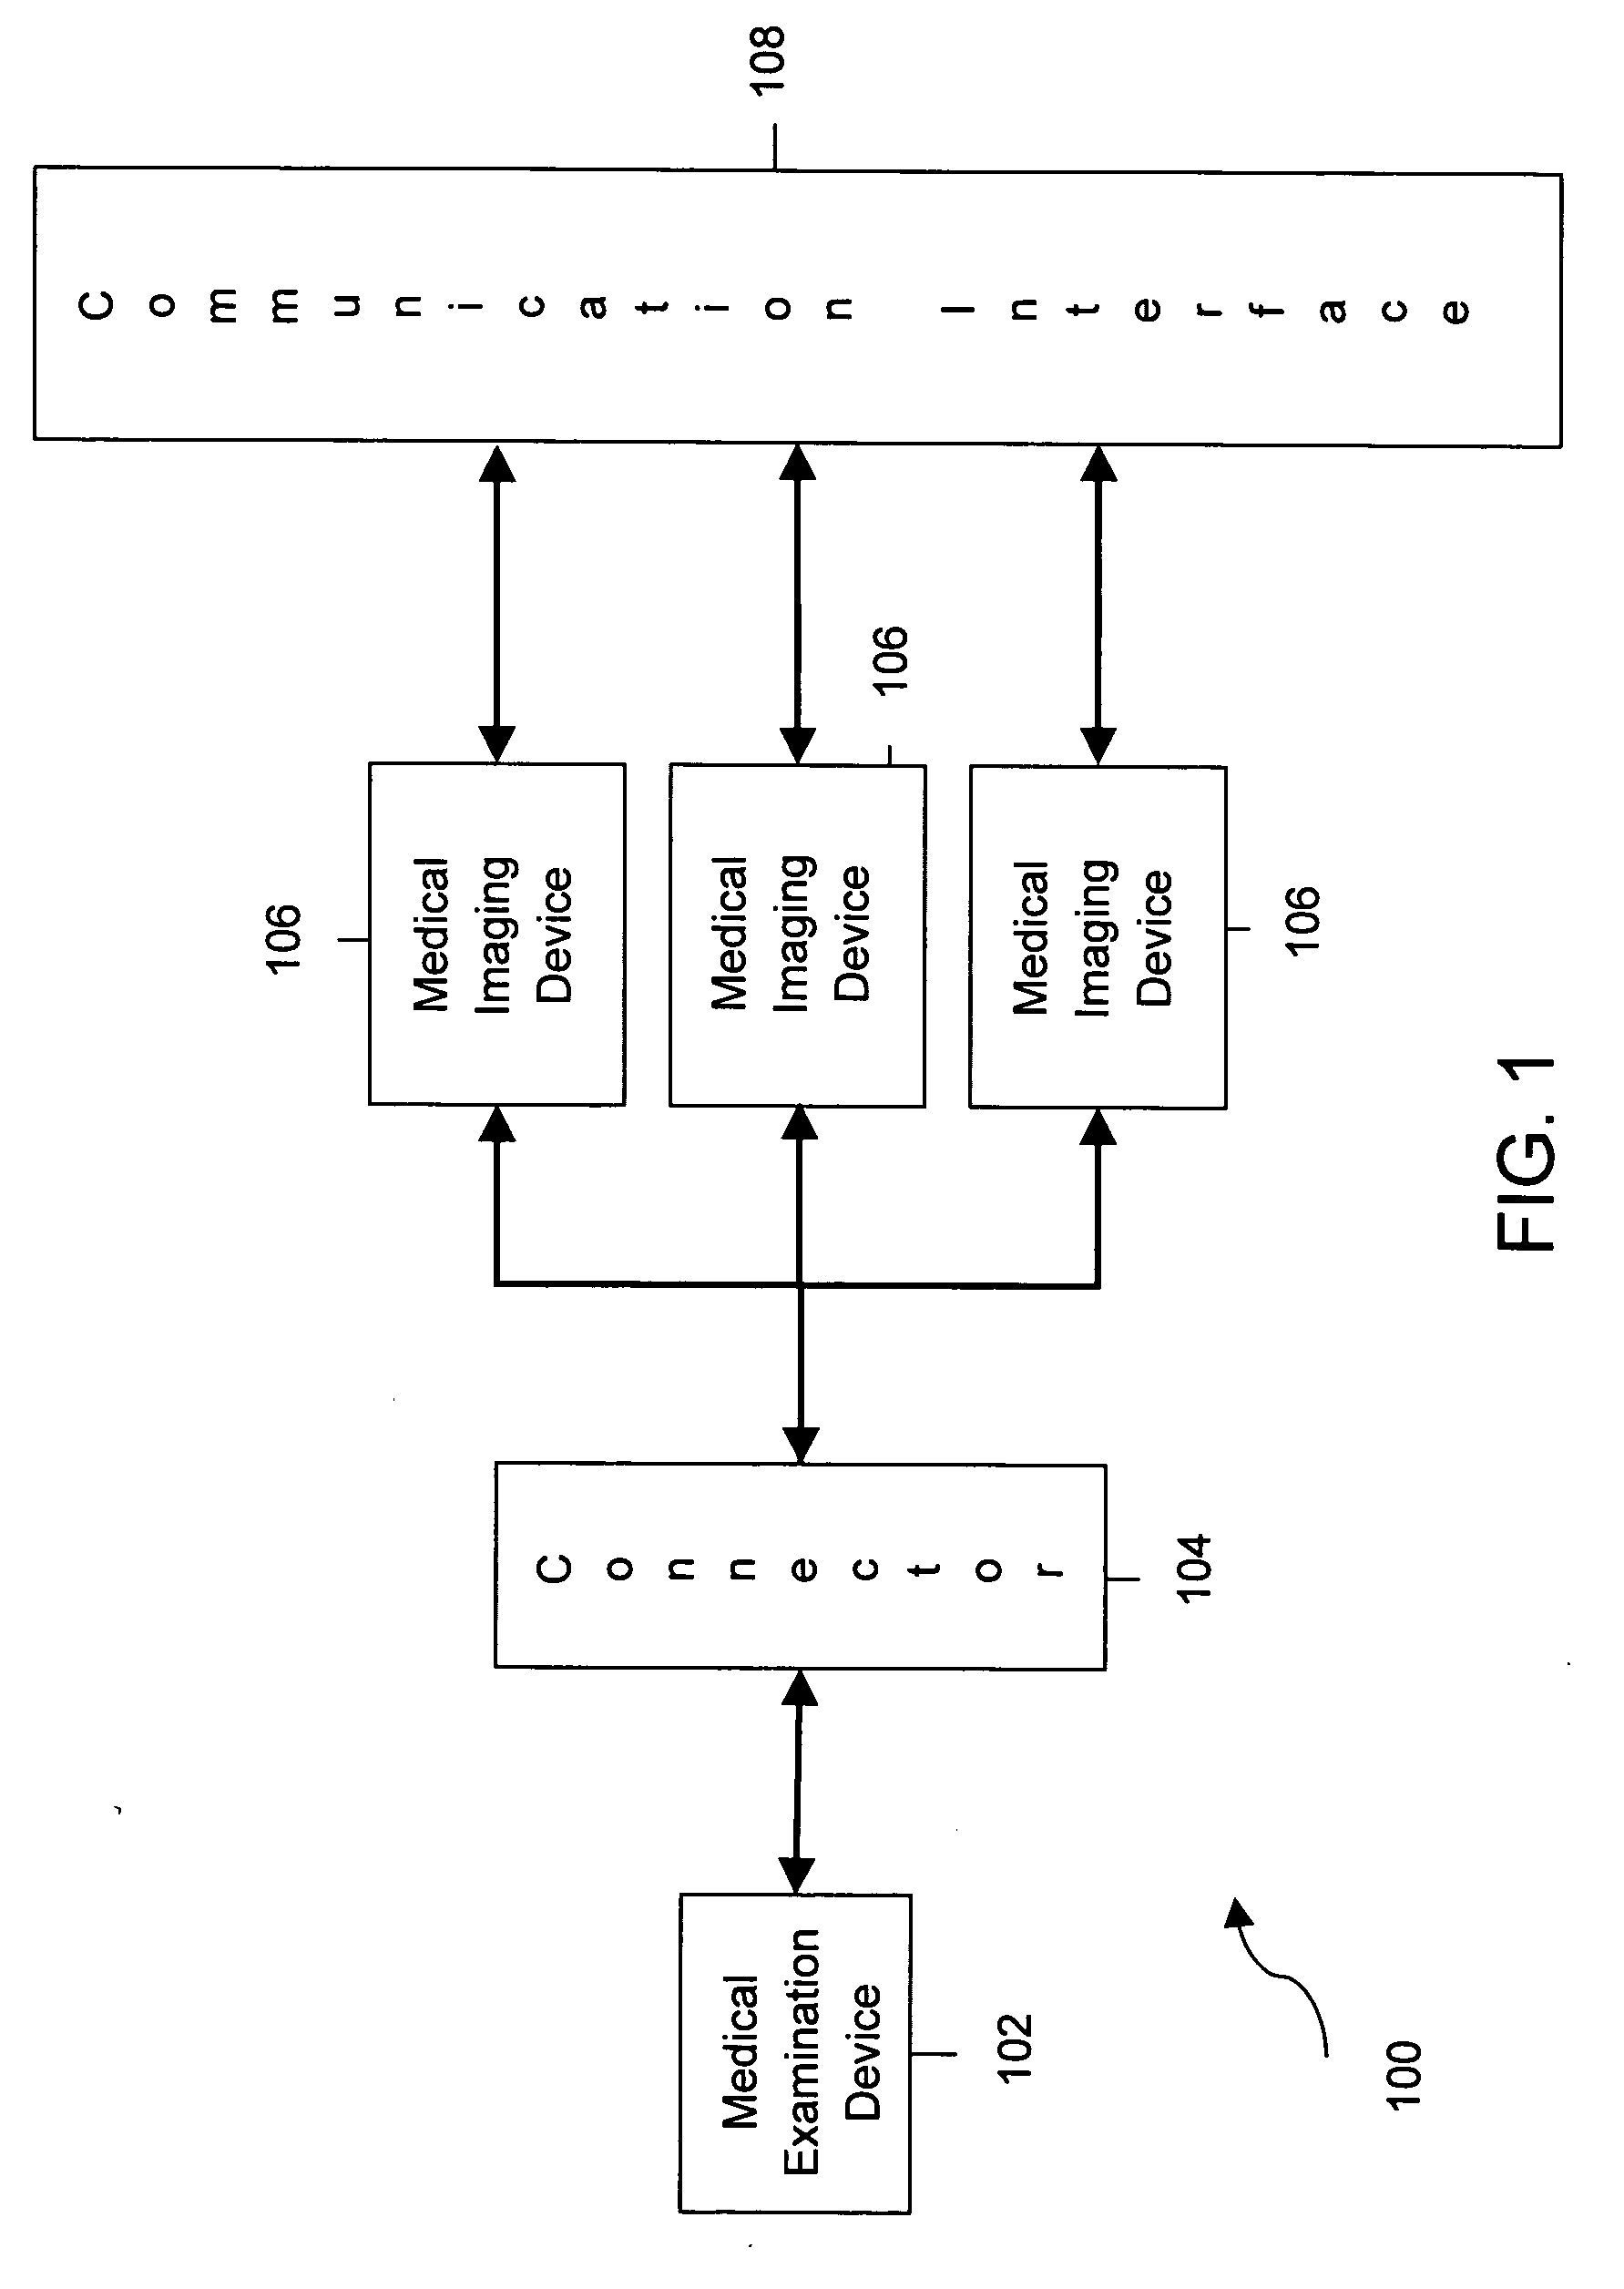 System and method for providing communication between ultrasound scanners